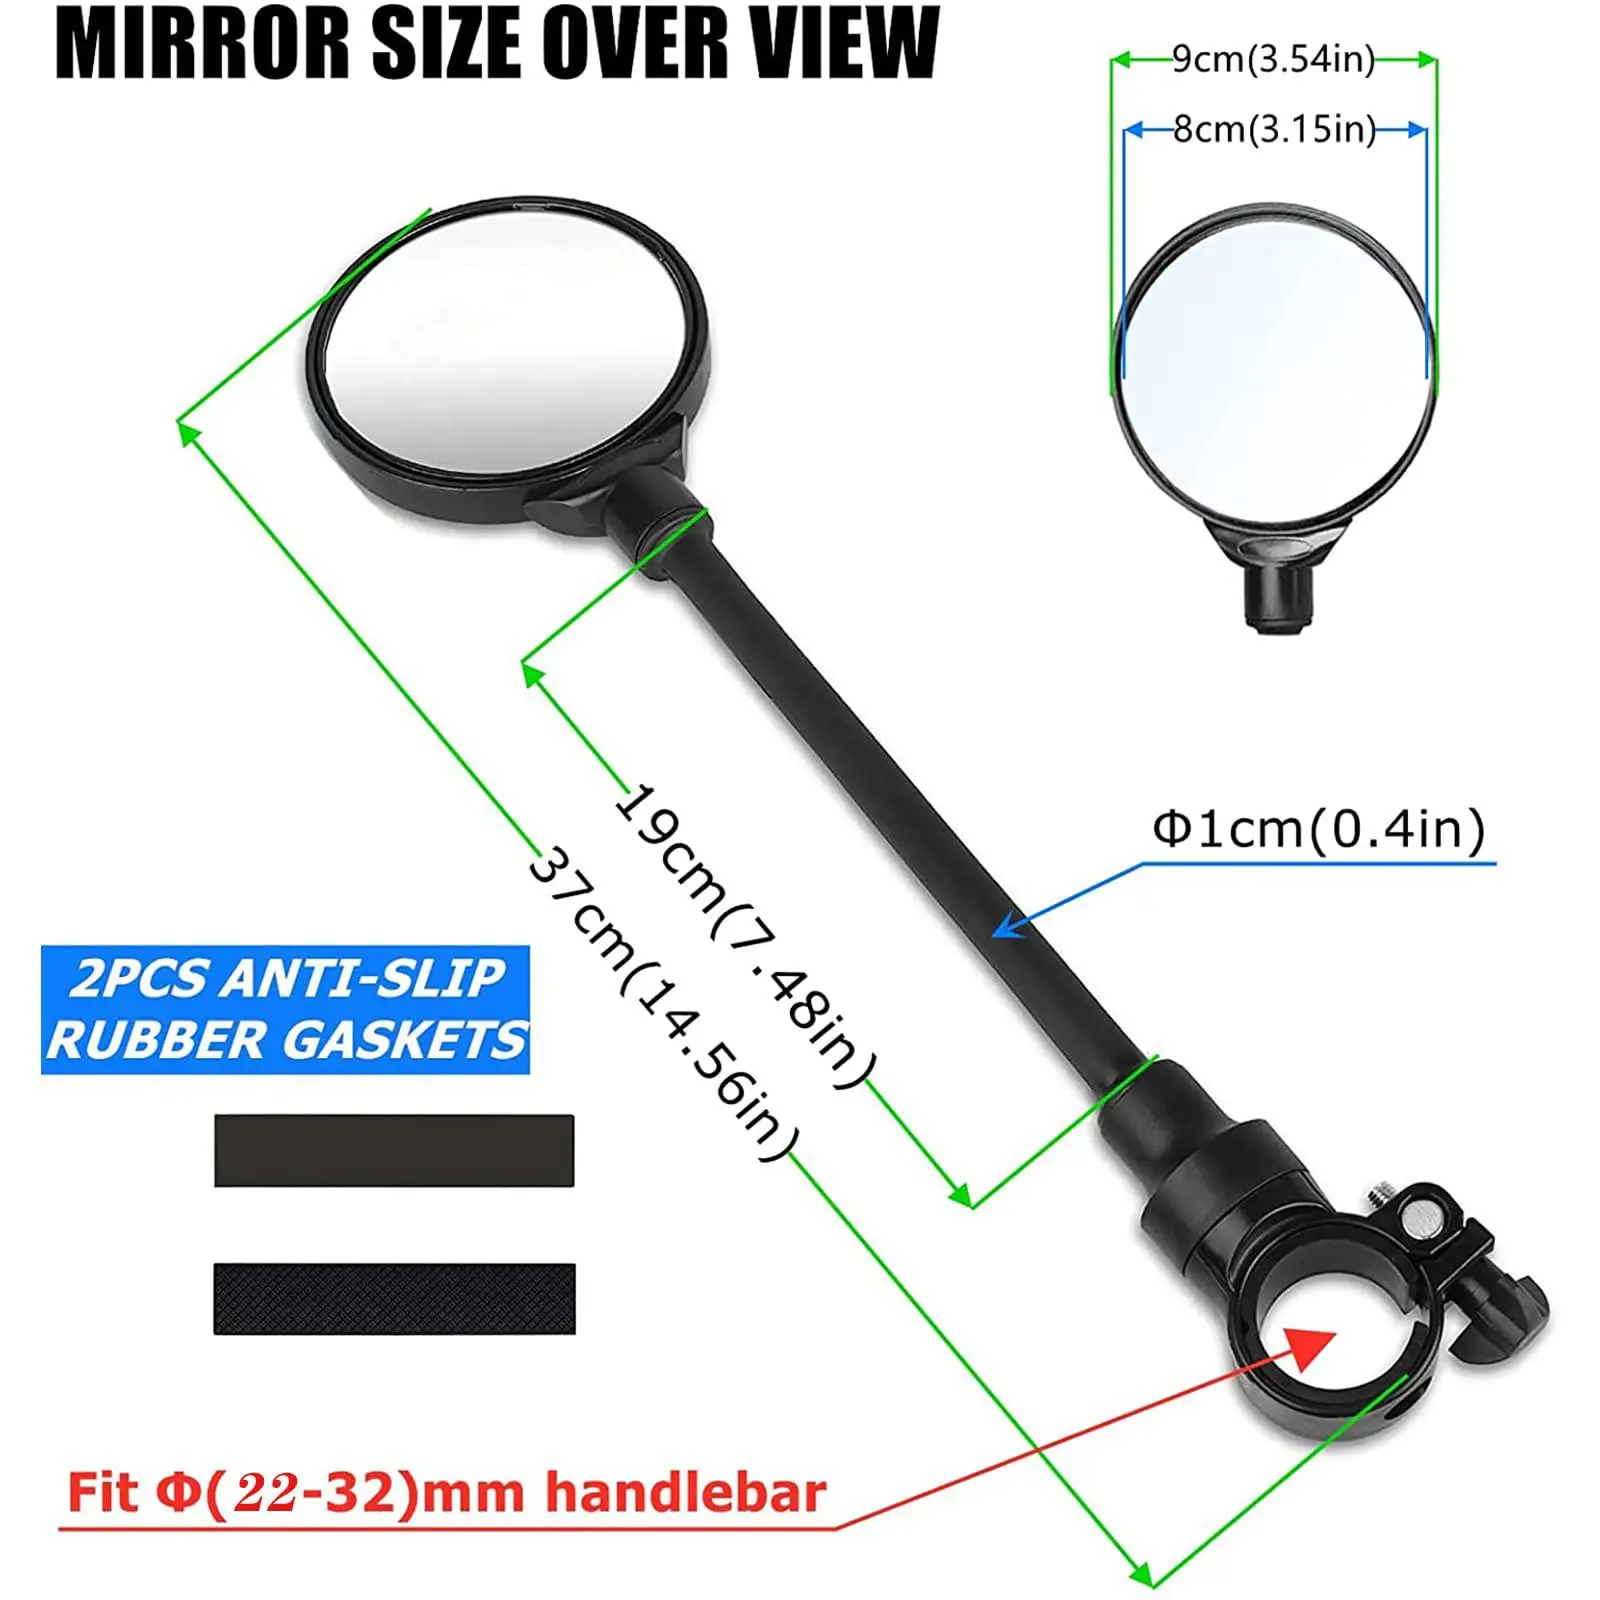  Mirror Convex Safety Mirror Handlebar Mounted Shockproof Stable